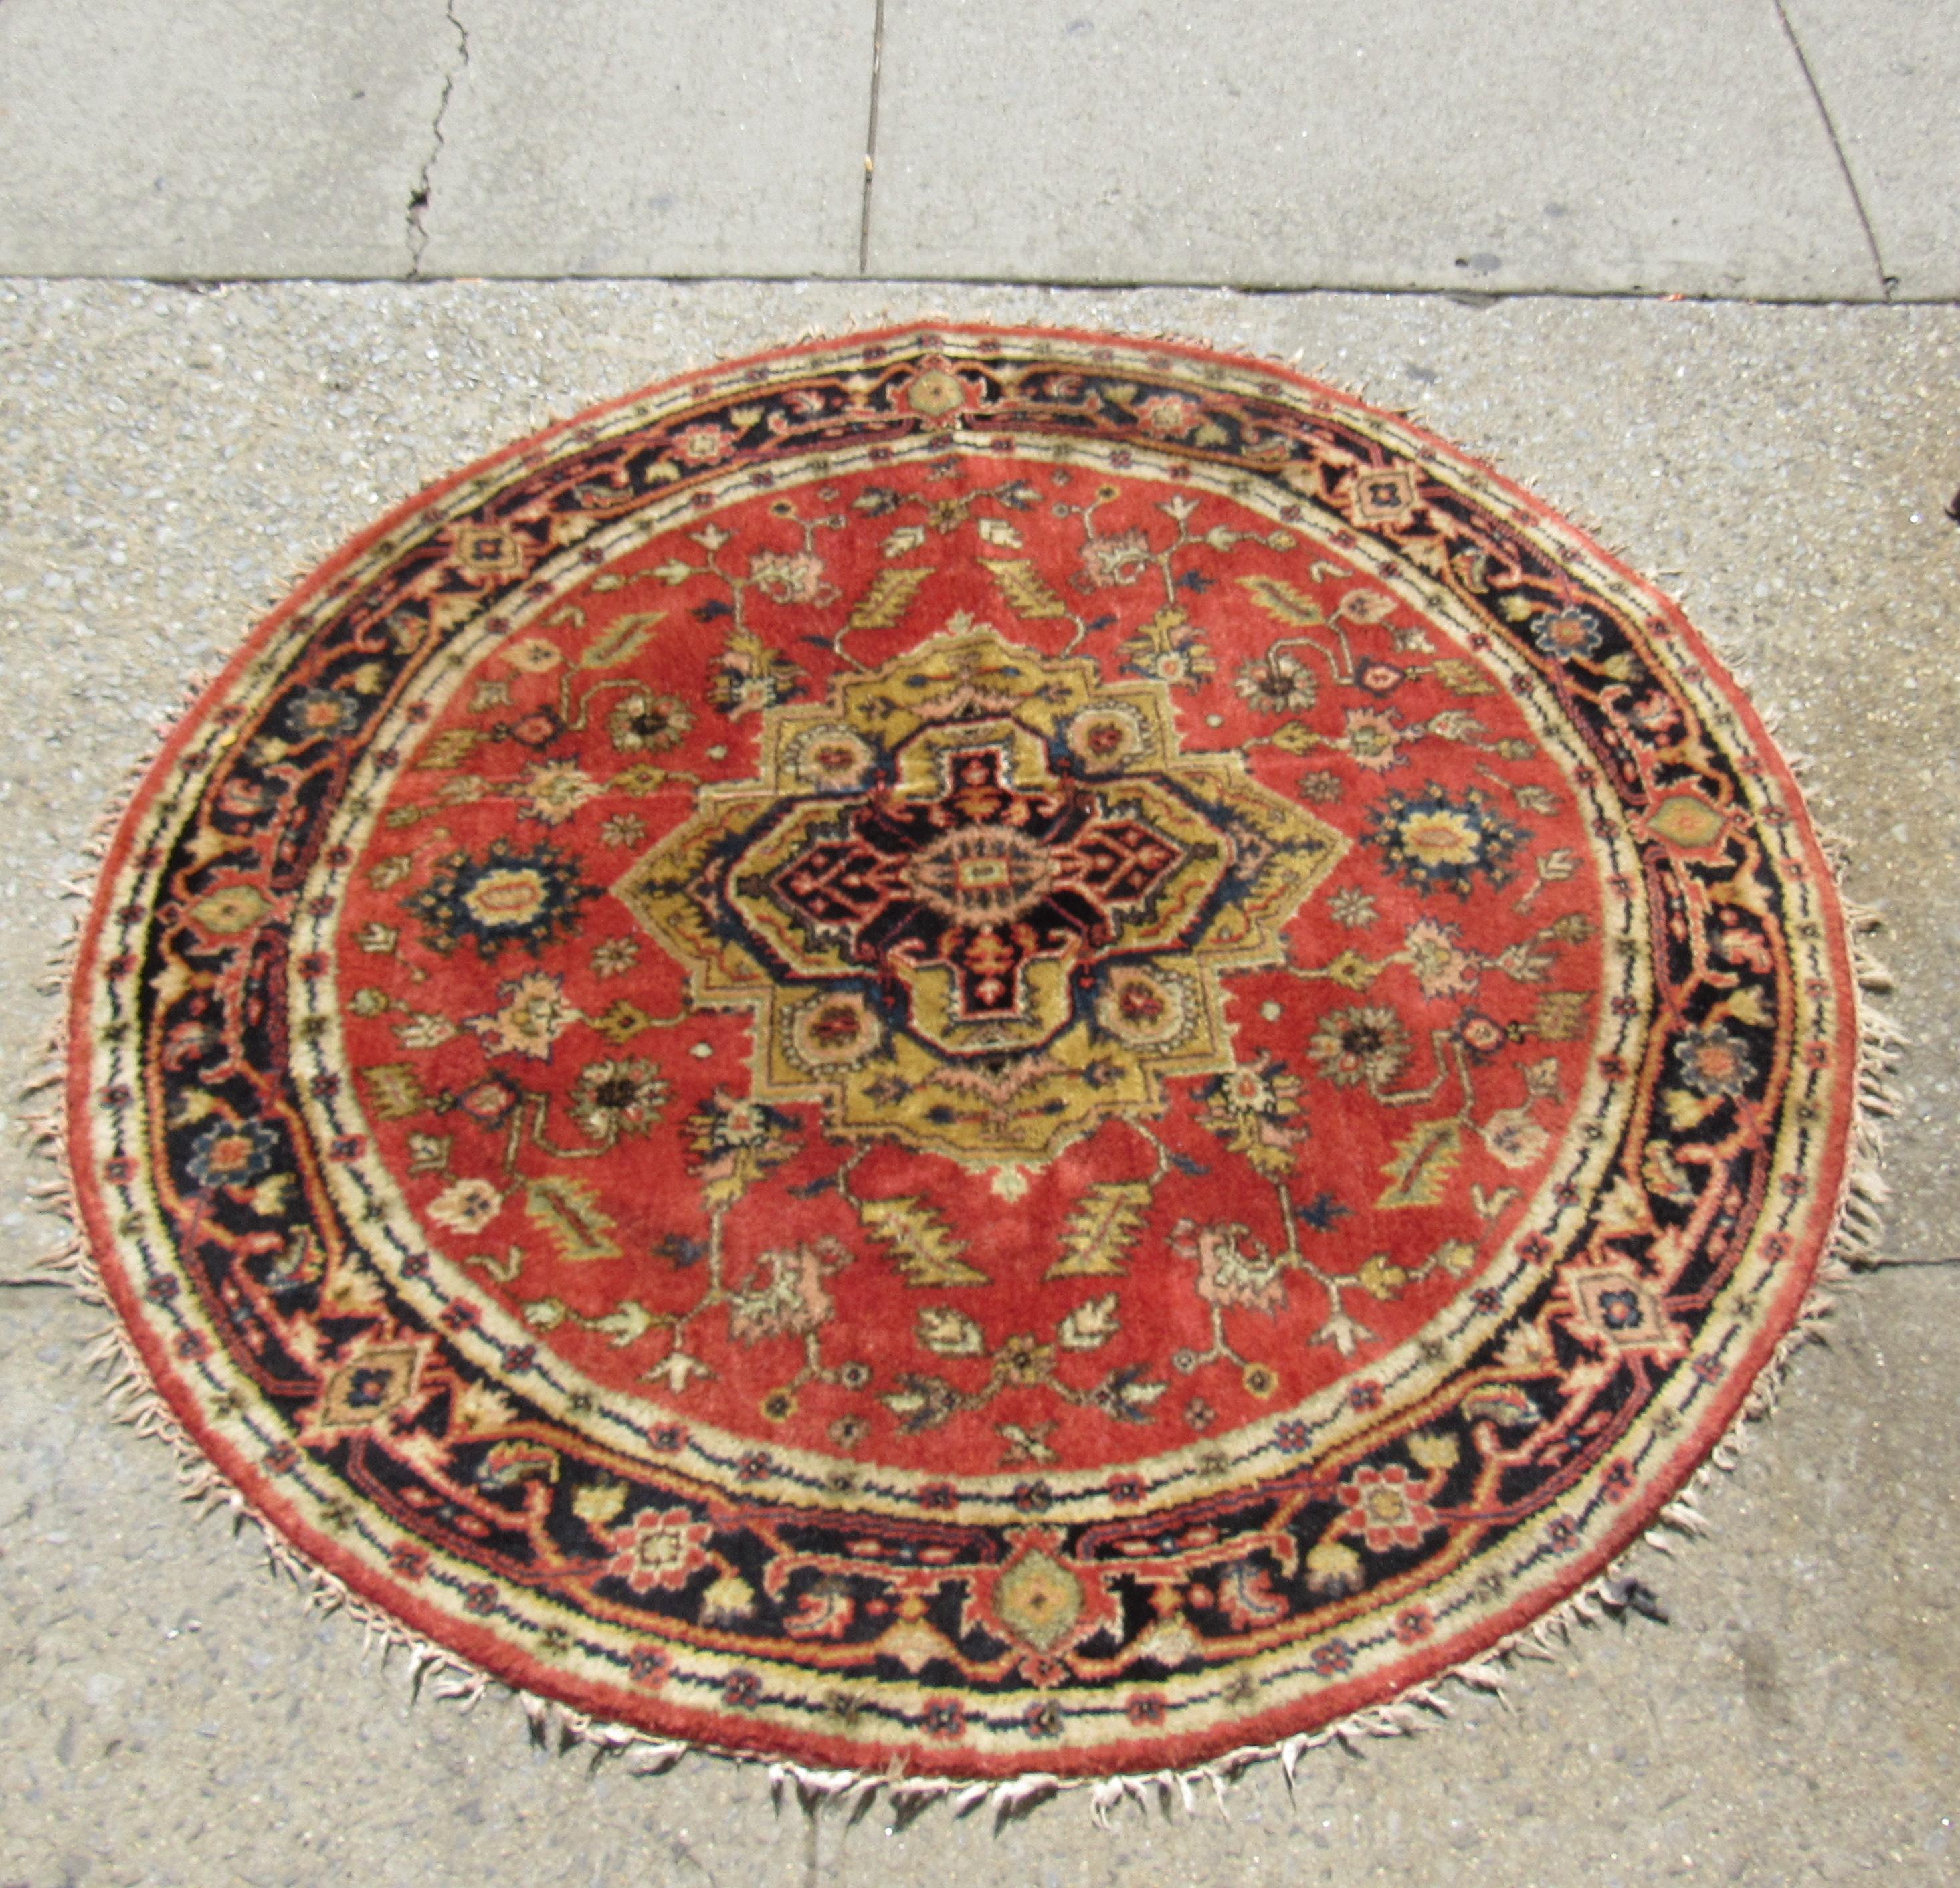 Beautifully made oriental rug in a unique circular shape. At 70